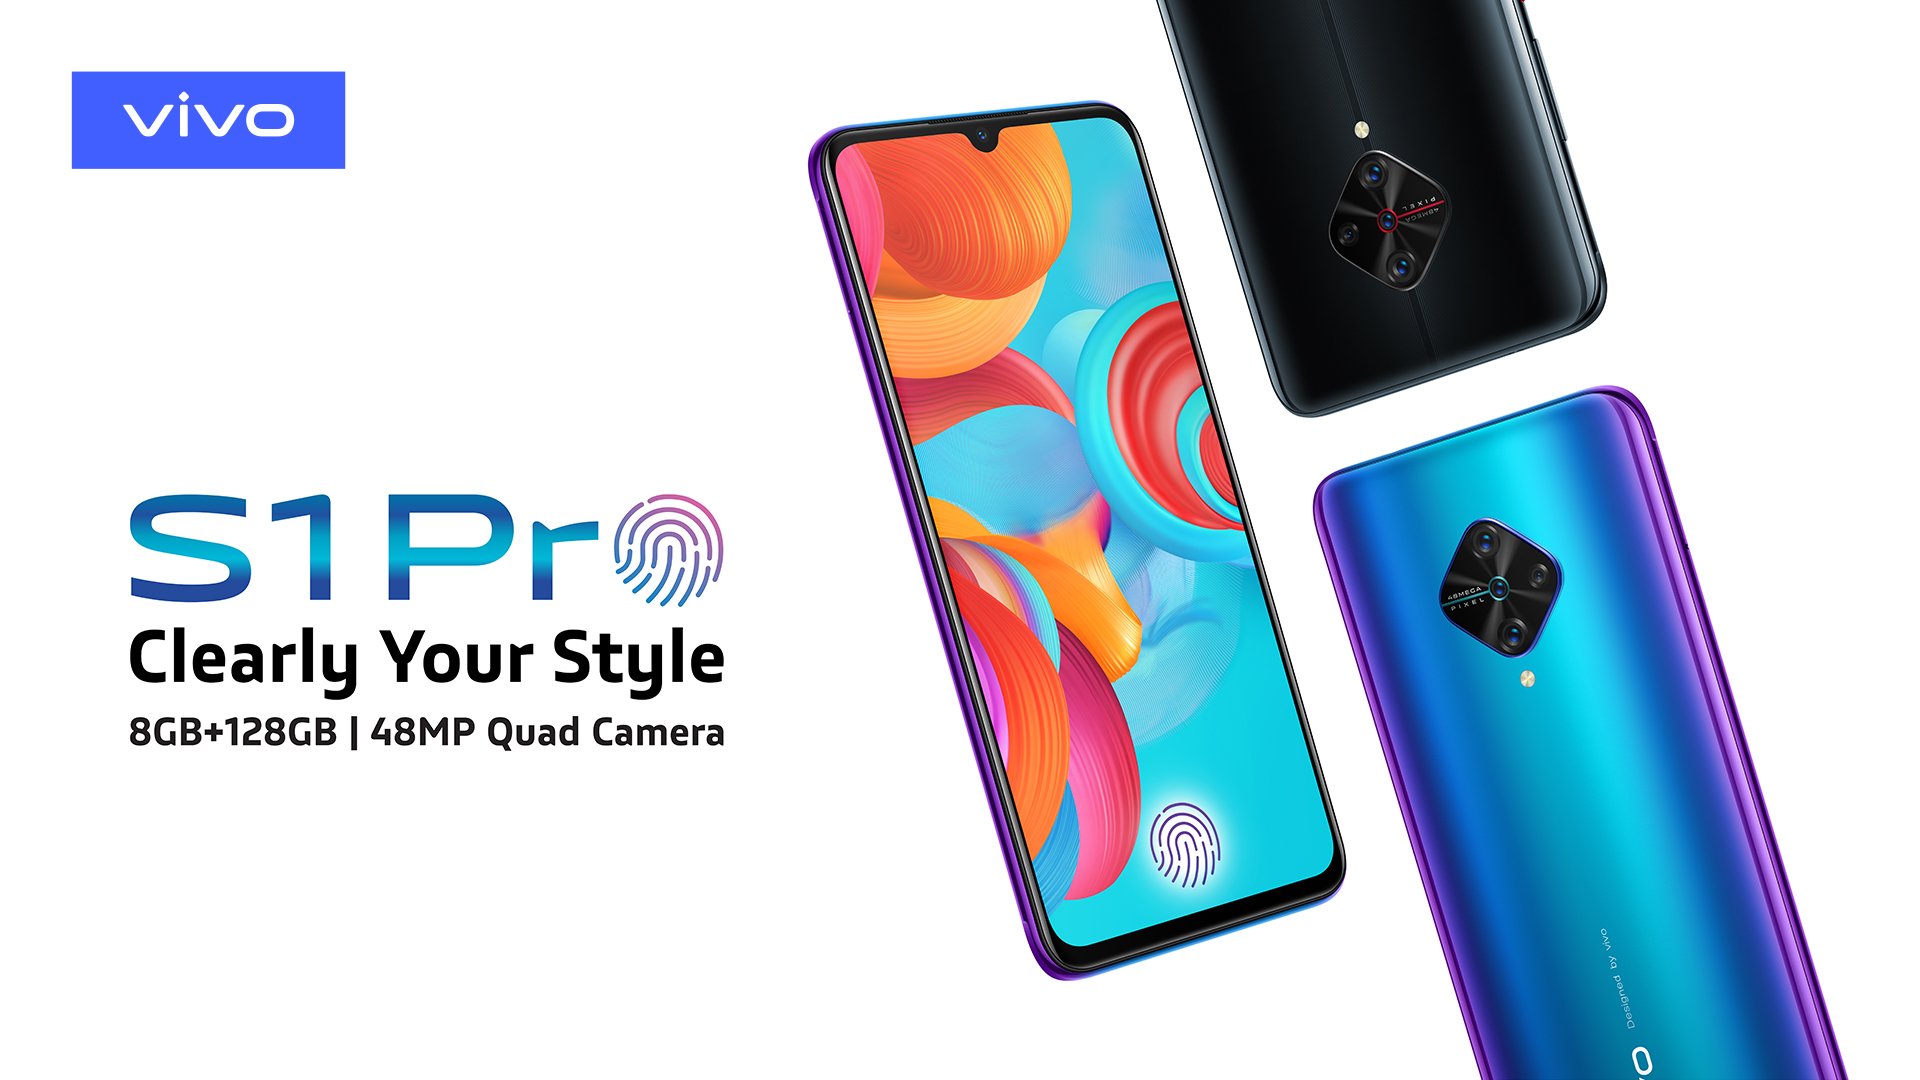 Vivo S1 Pro Launch Dates For Philippines And Indonesia Confirmed